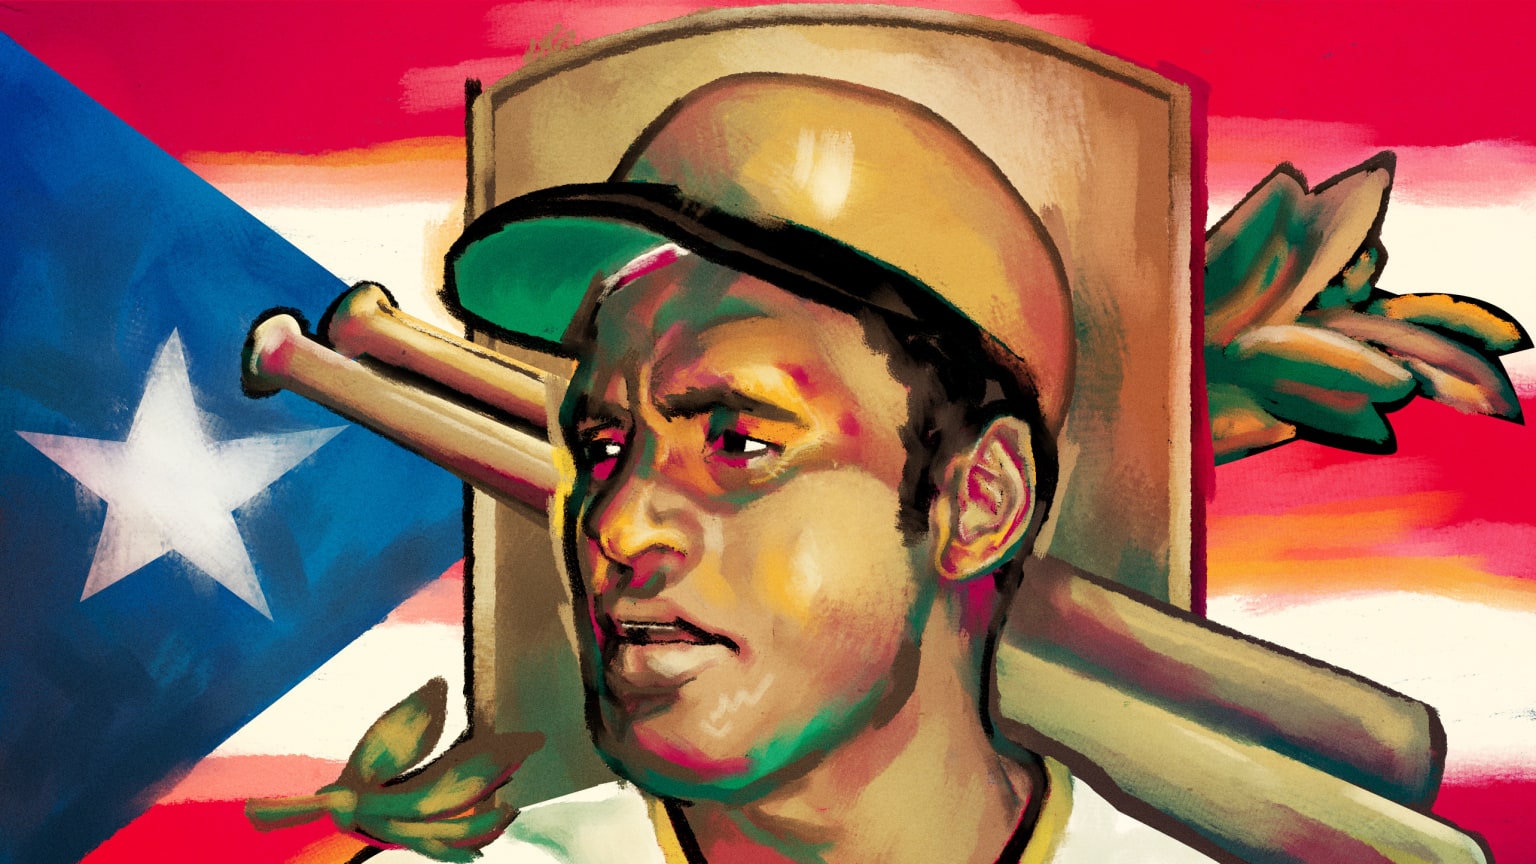 A digital painting of Roberto Clemente in portrait with a Hall of Fame plaque and the Puerto Rico flag behind him